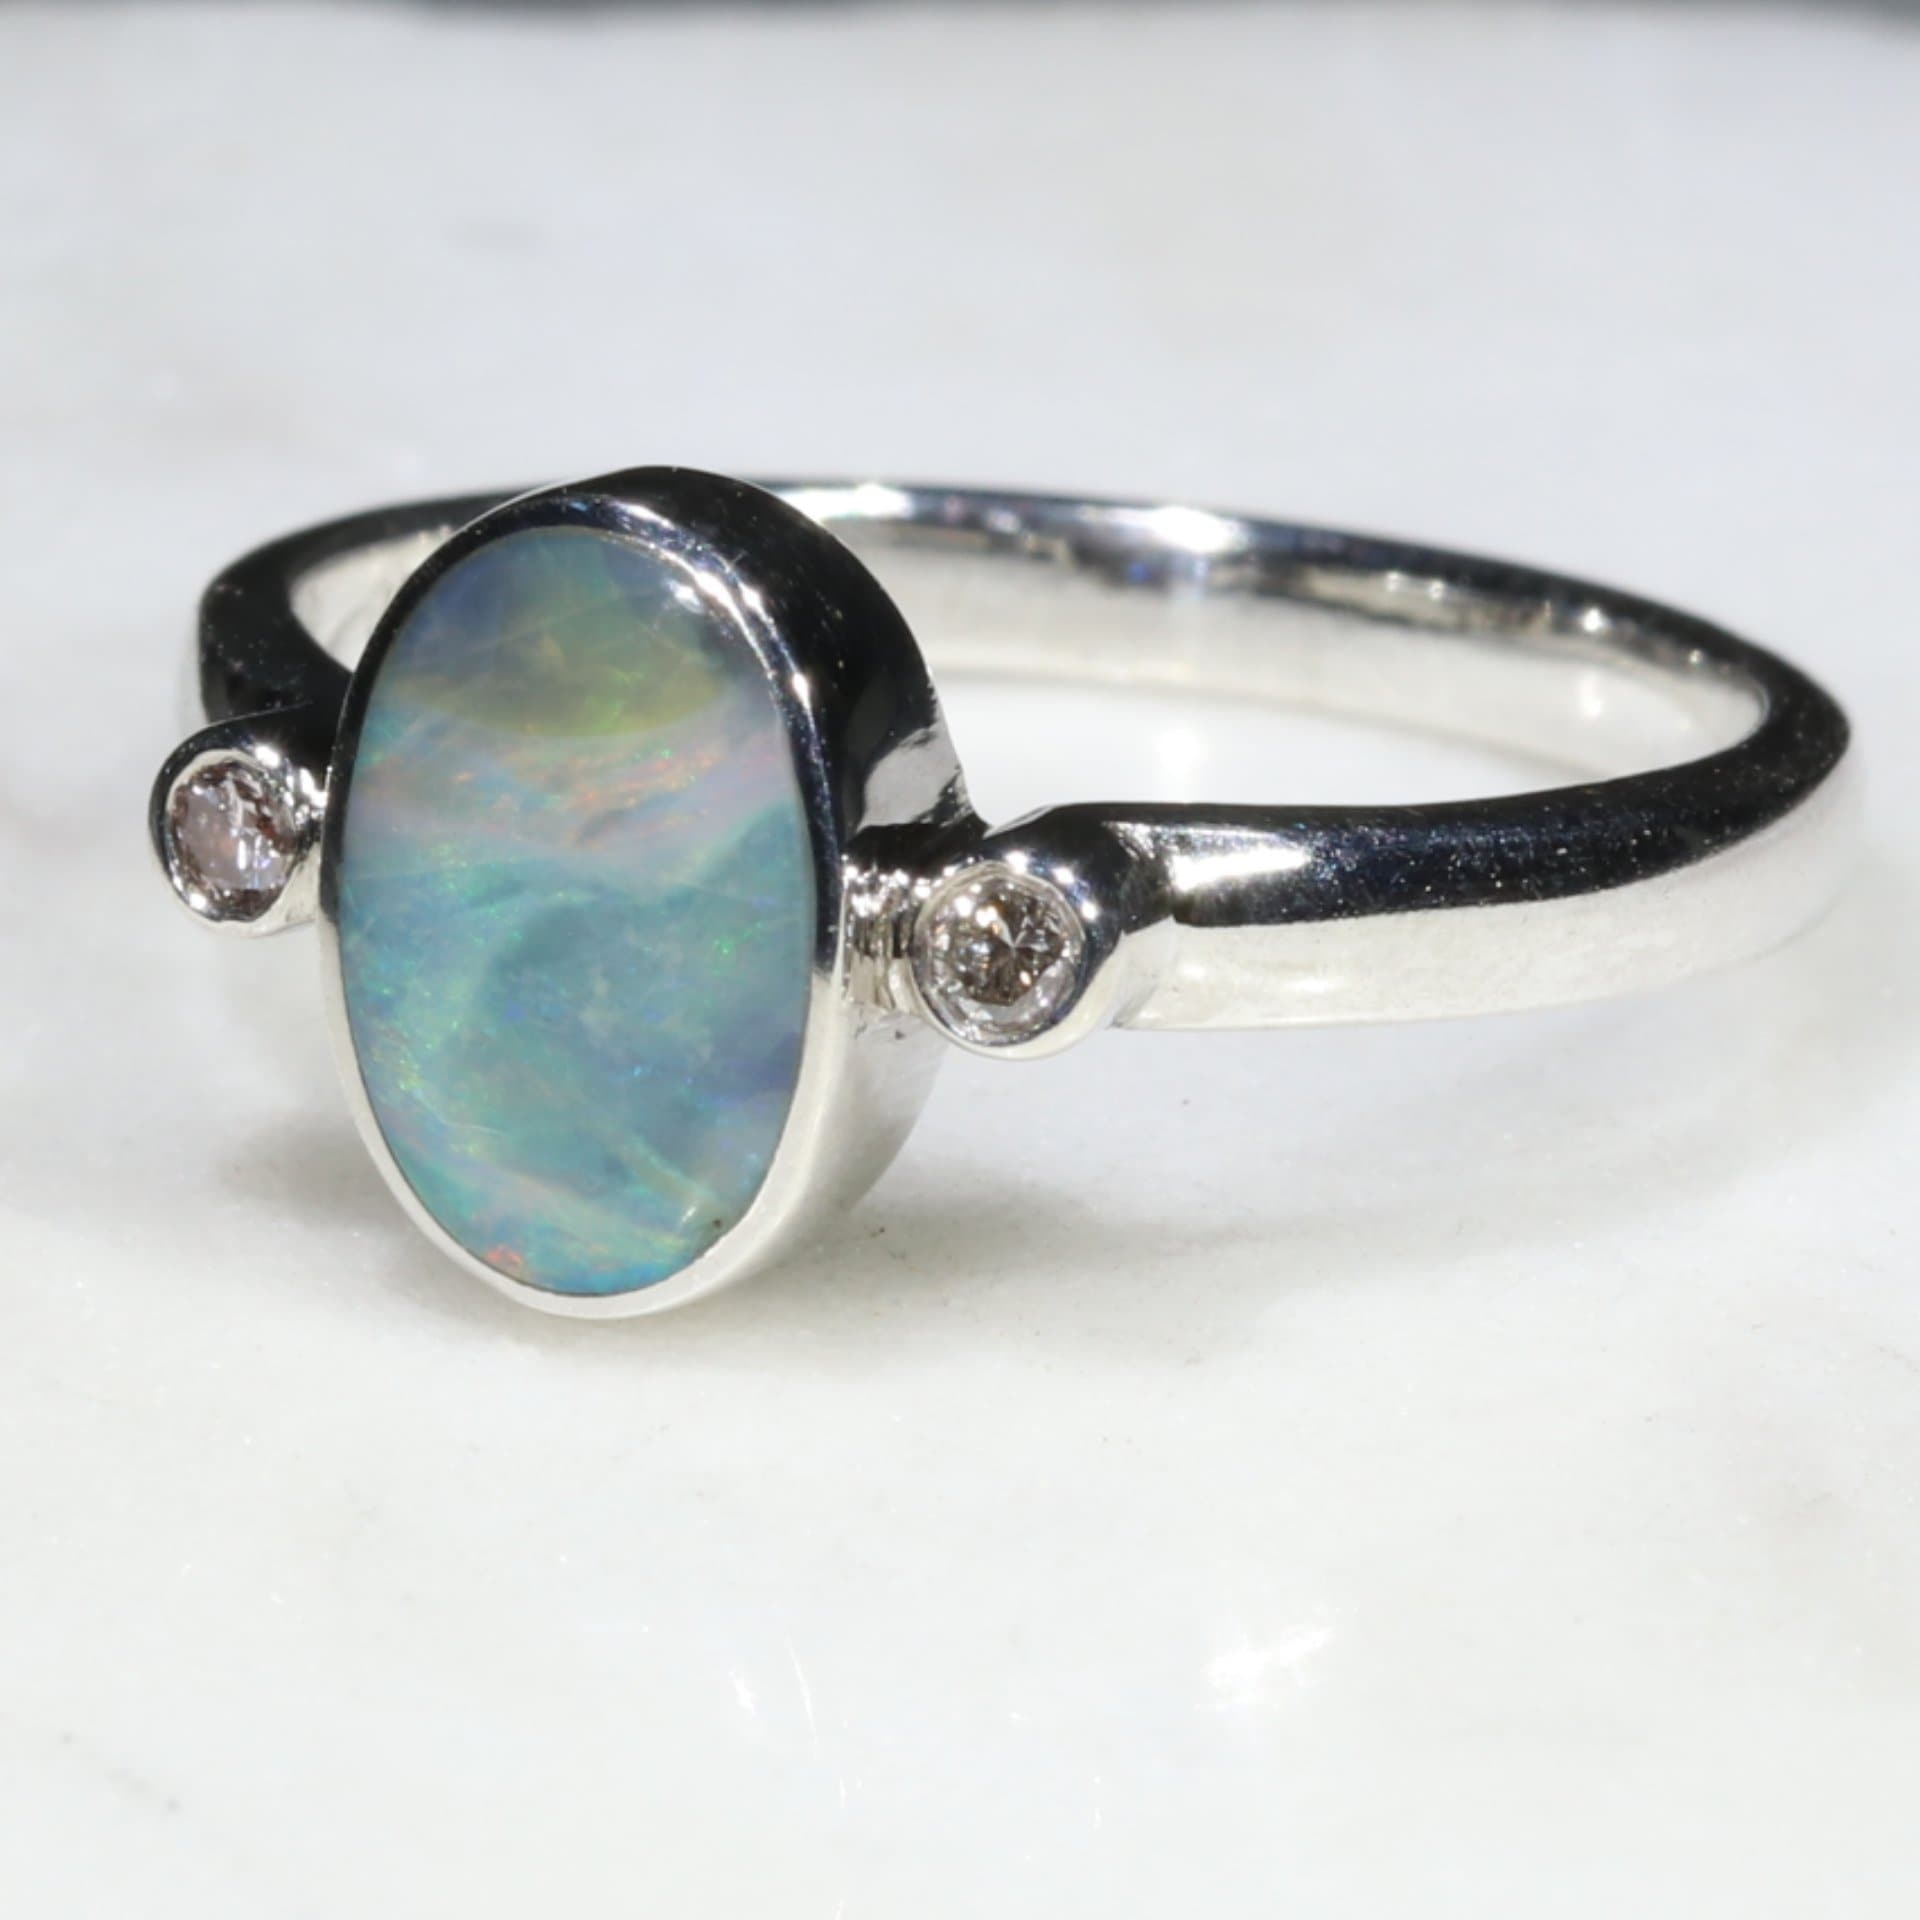 Australian Solid Boulder Opal and Diamond Silver Ring - Size 6.25 Code